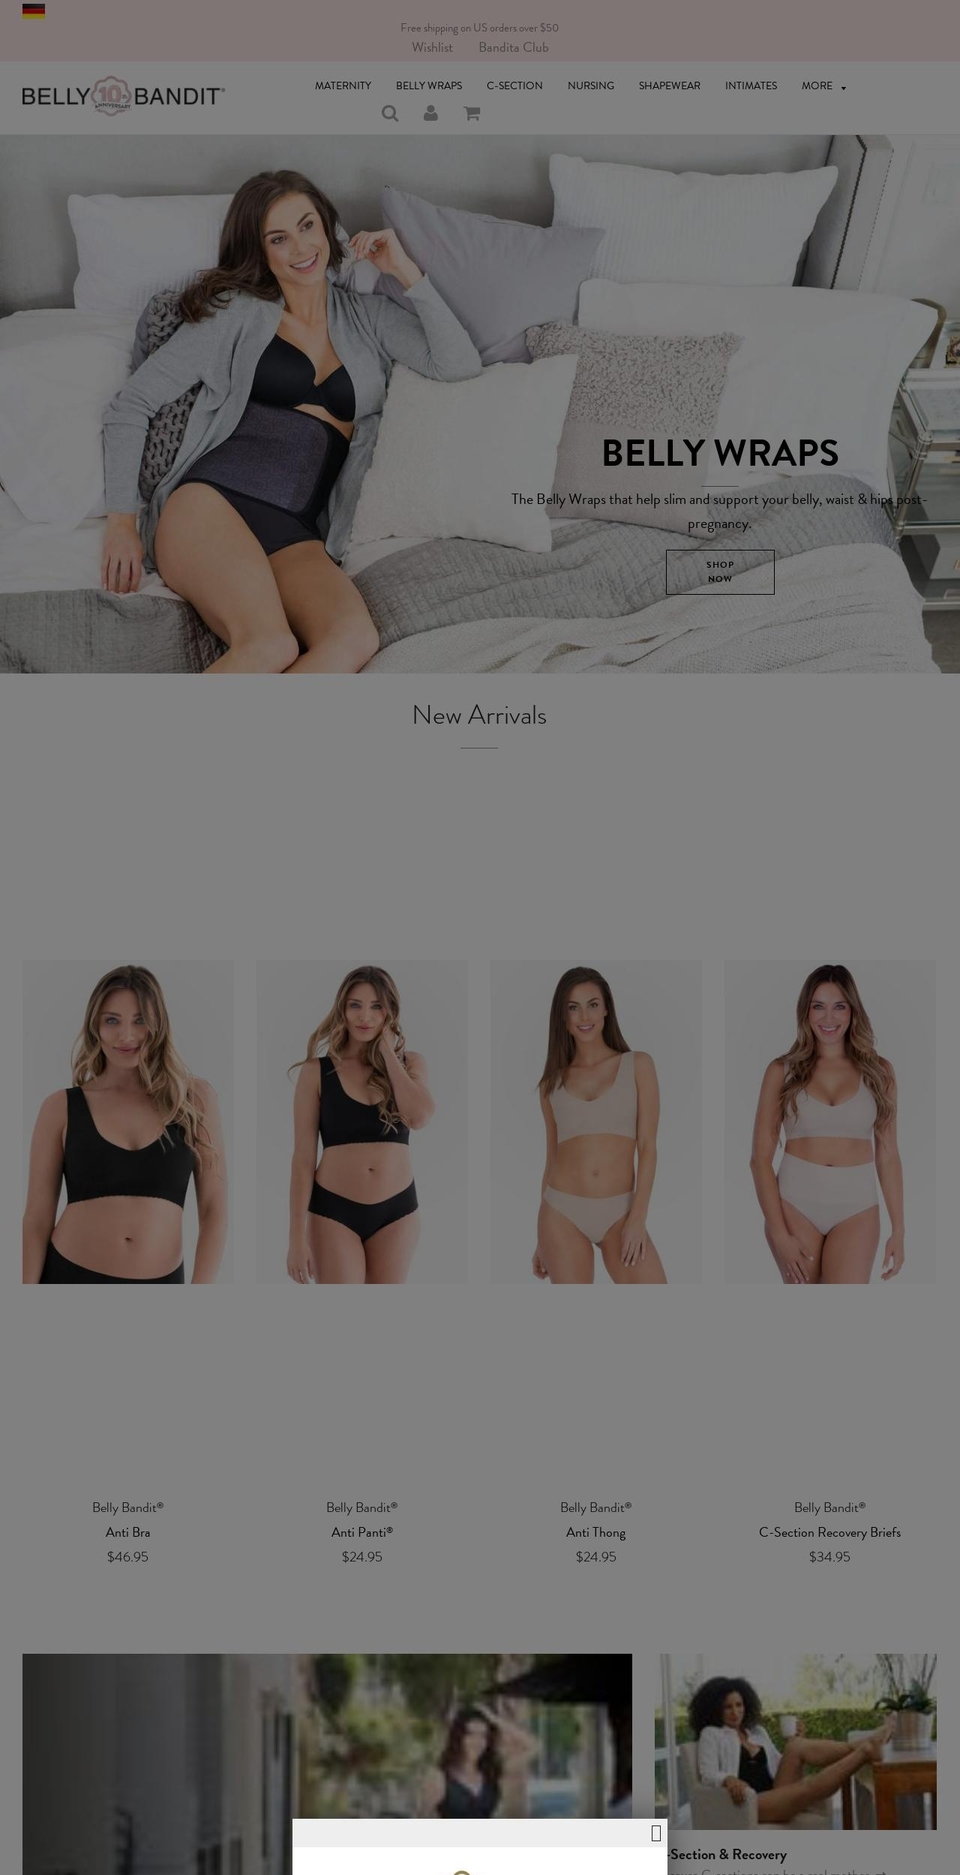 Copy of Flow Shopify theme site example bellybandits.com